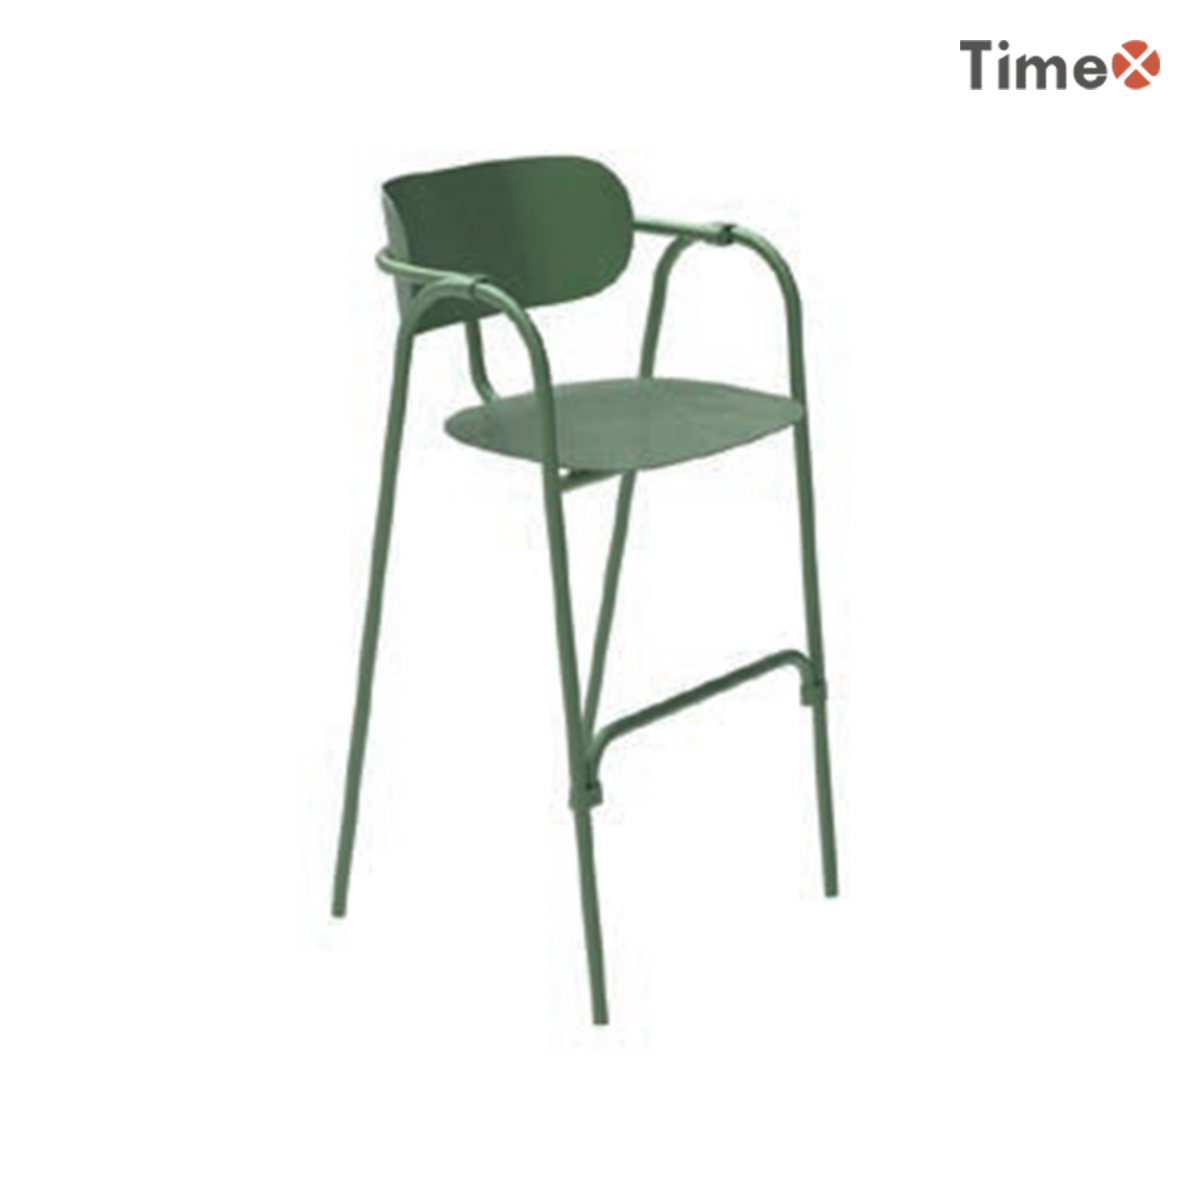 The green design metal chair wholesale.